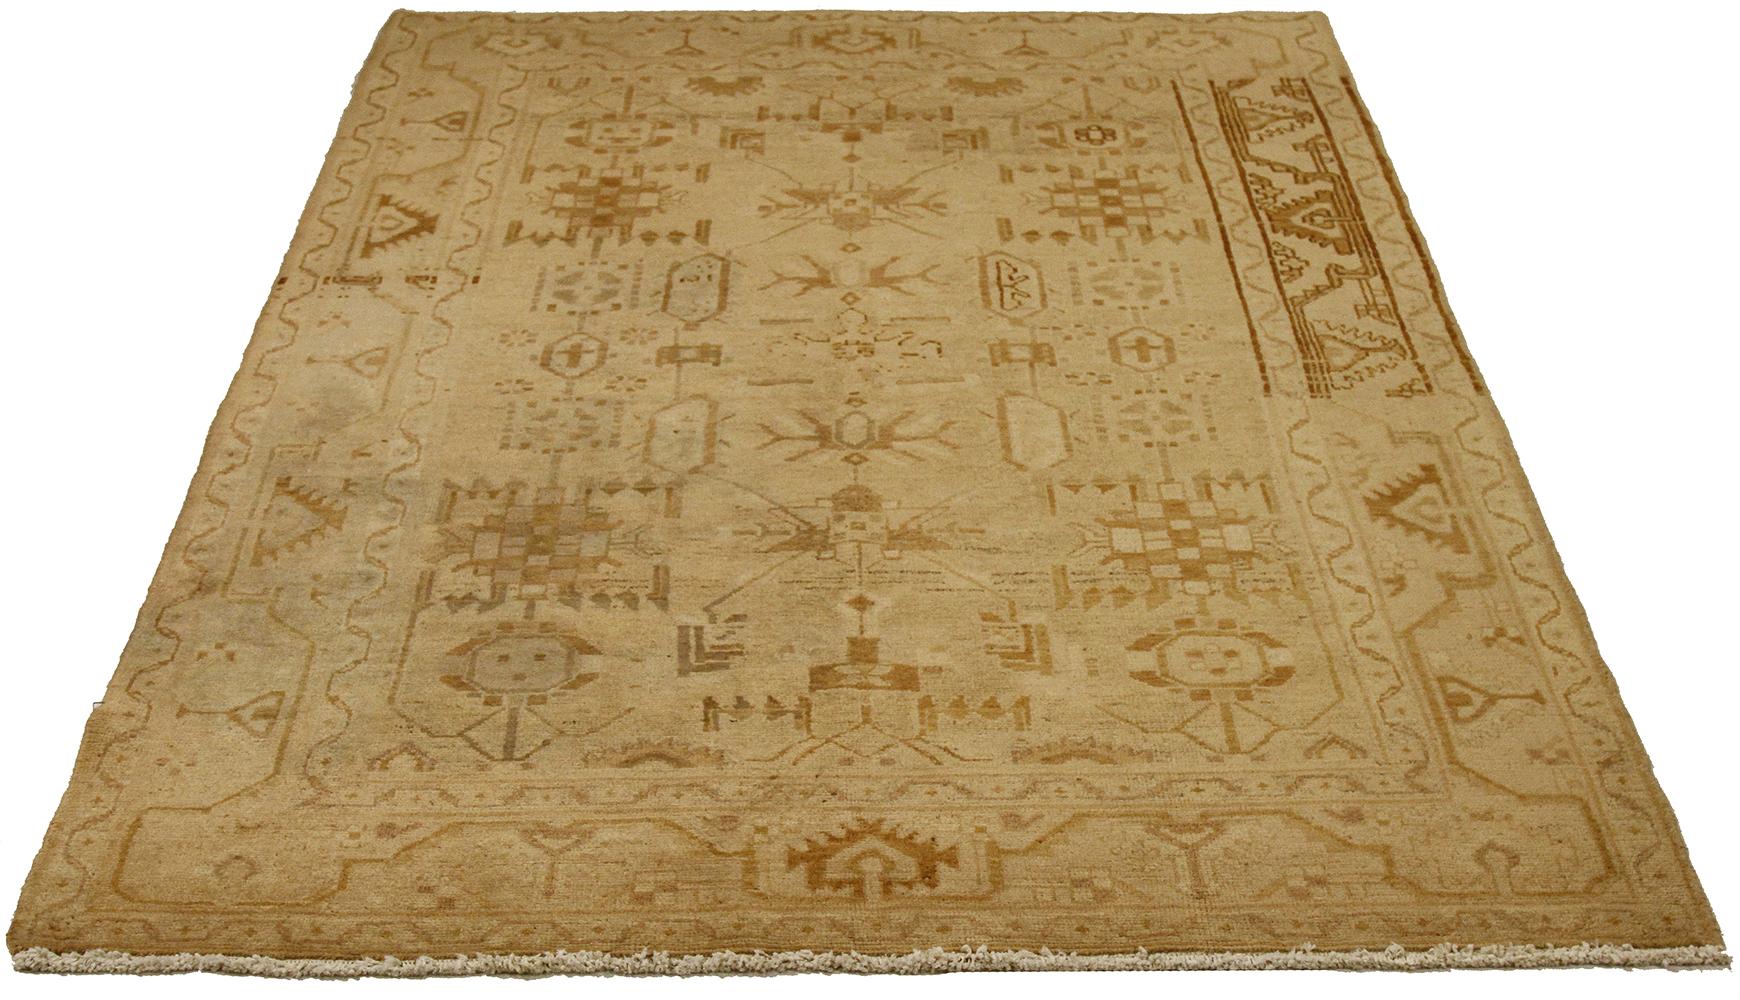 Antique Persian runner rug handwoven from the finest sheep’s wool and colored with all-natural vegetable dyes that are safe for humans and pets. It’s a traditional Malayer design featuring faded beige and brown tribal details over an ivory field.